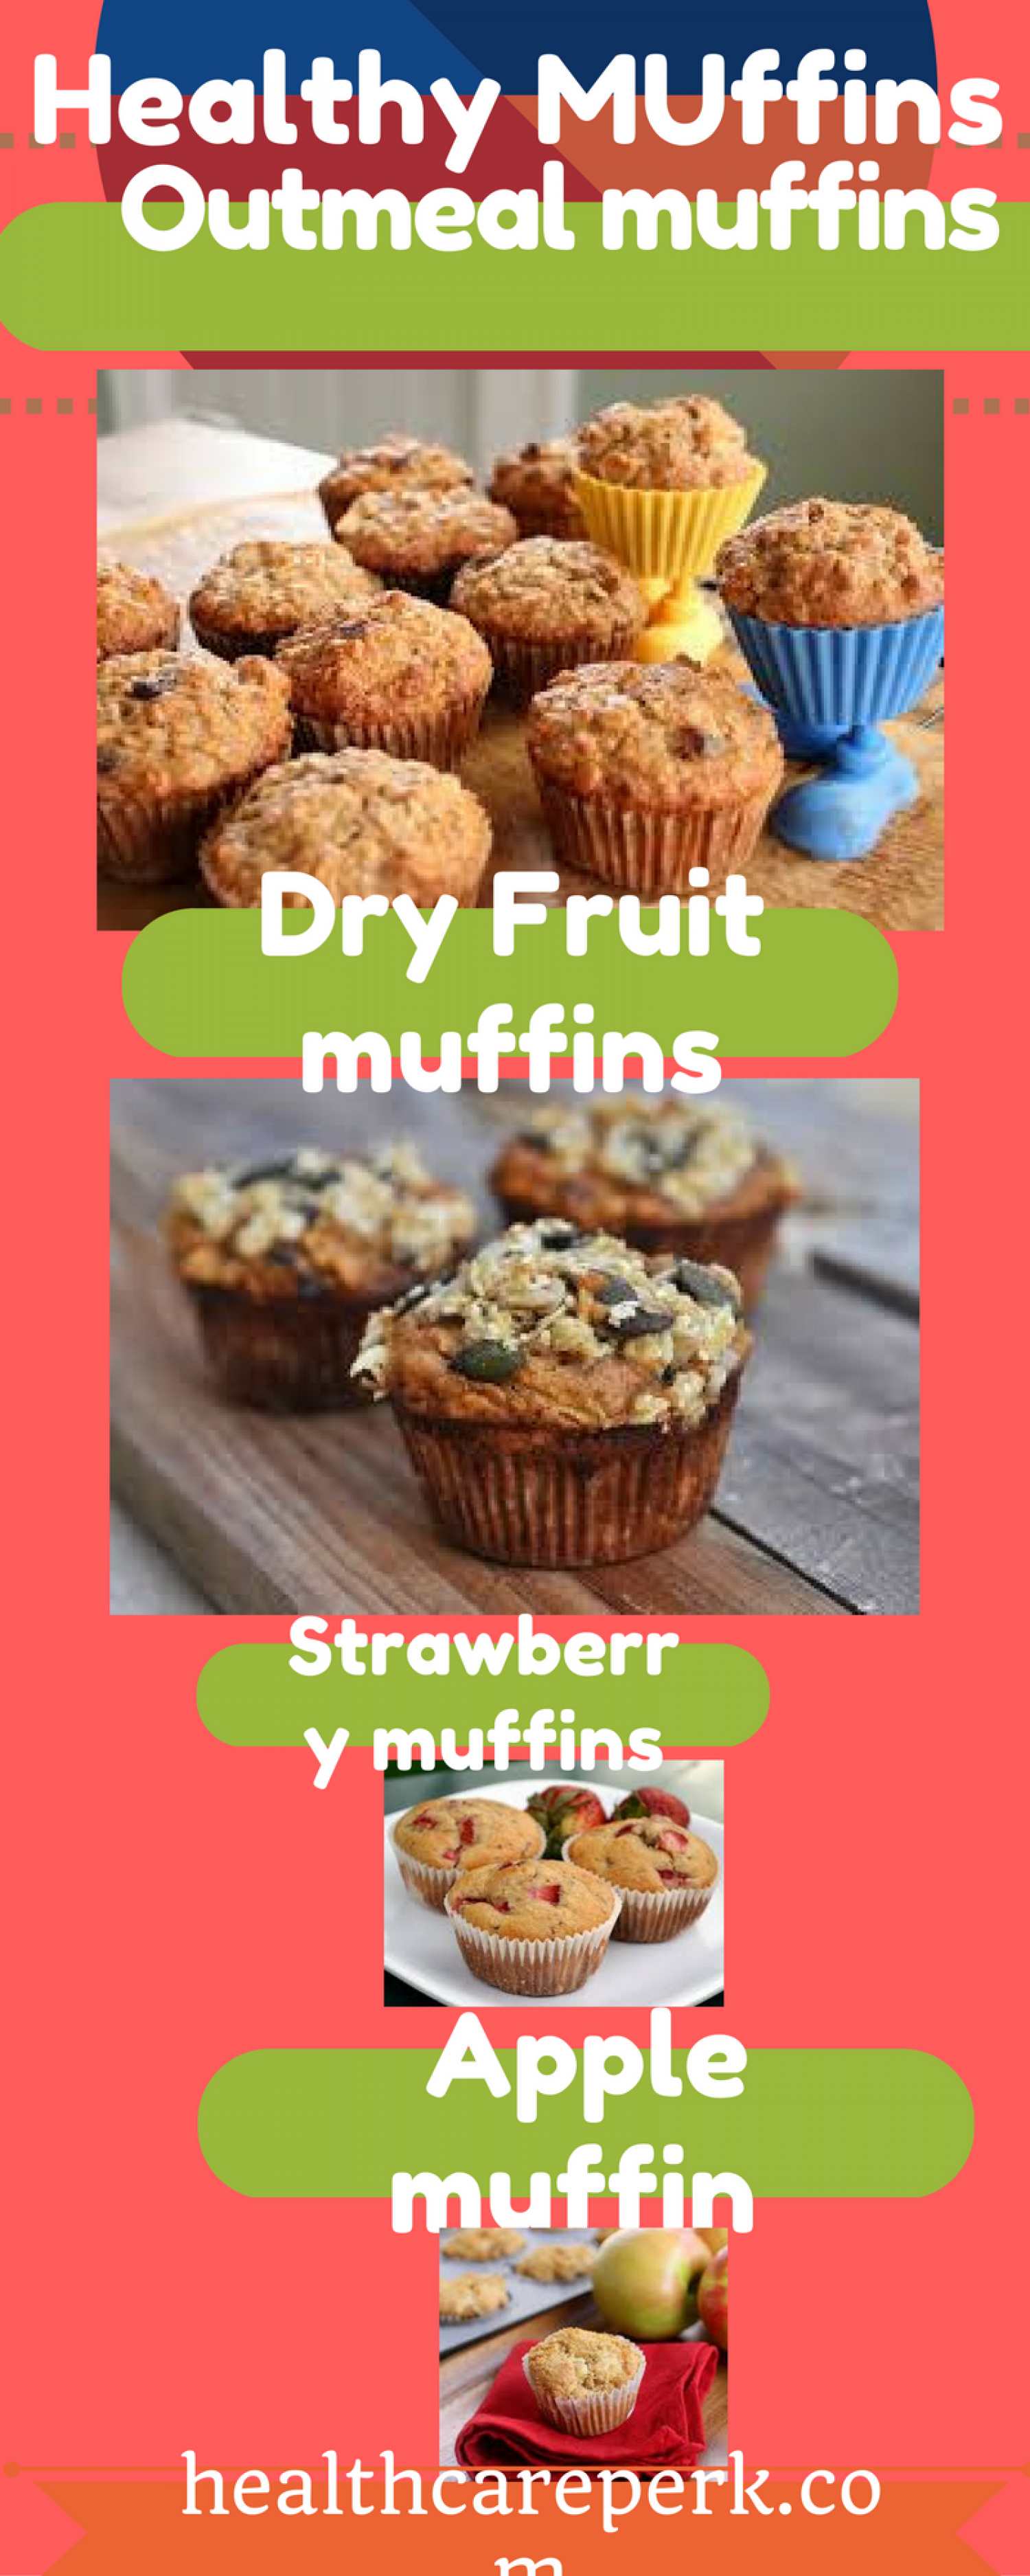 Healthy muffins easy to make easy to eat Infographic